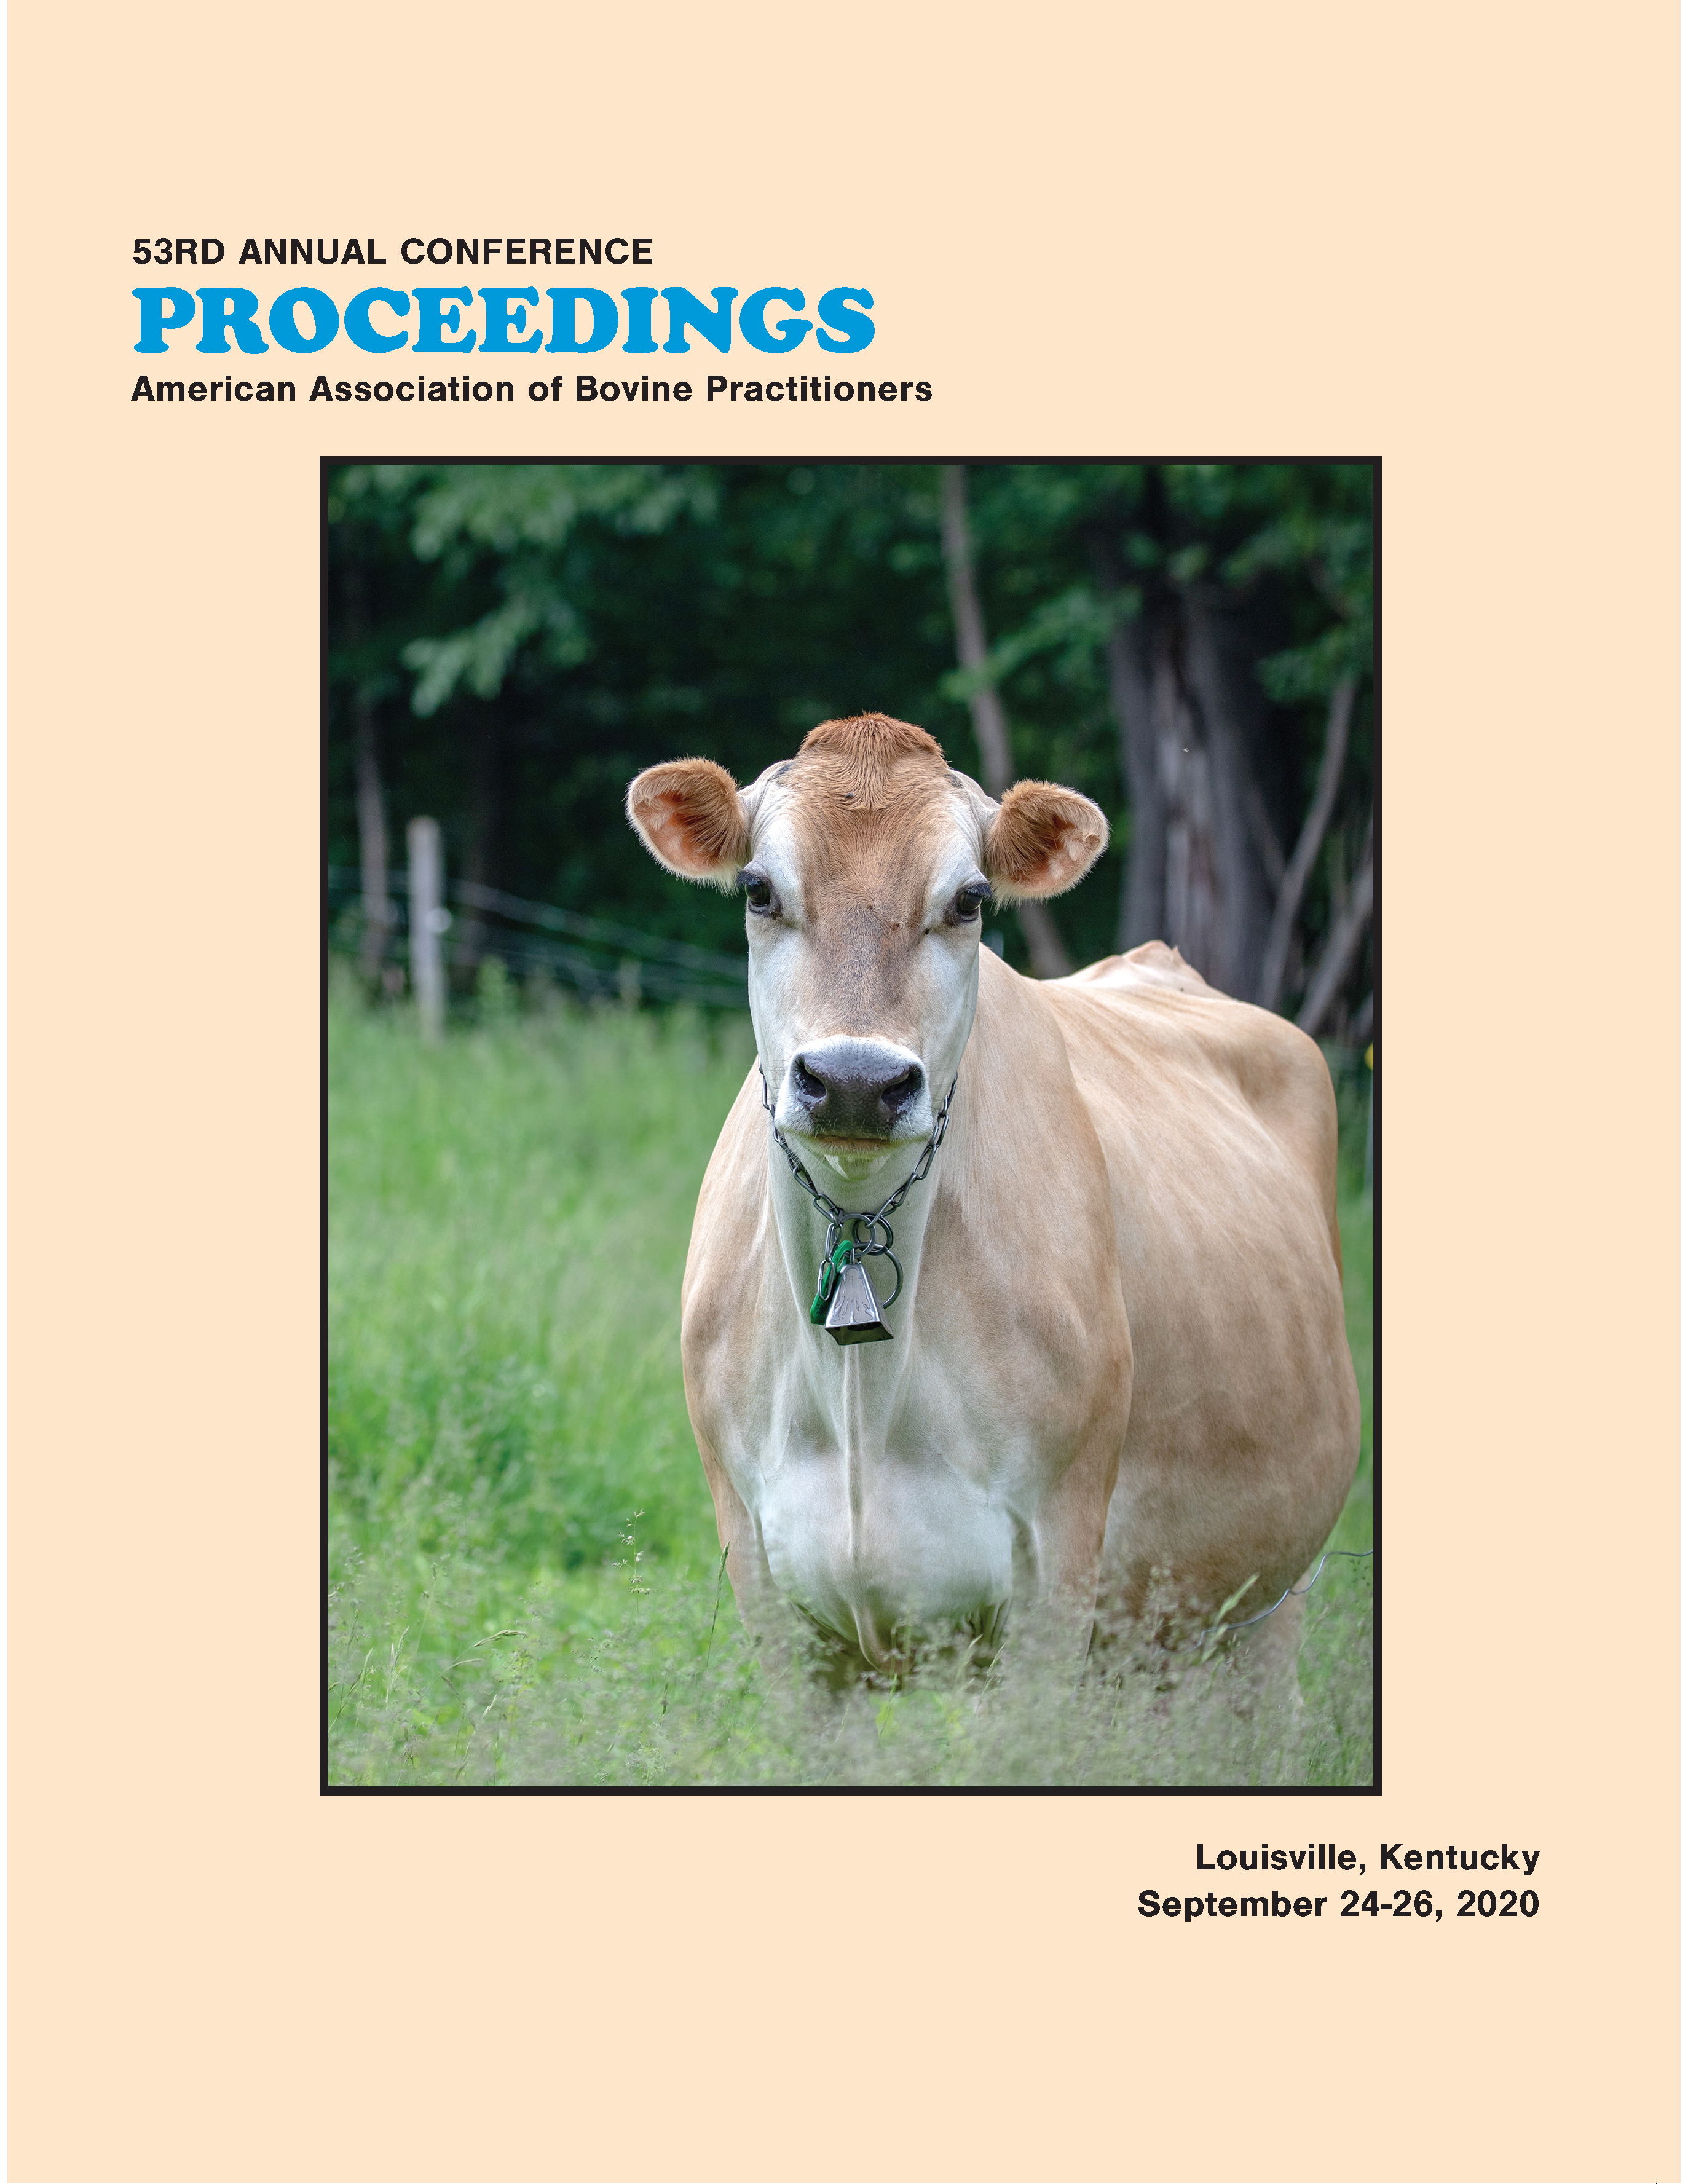 Cover image of the 53rd Conference Proceedings: A photo of a lone cow with a bell in a field.